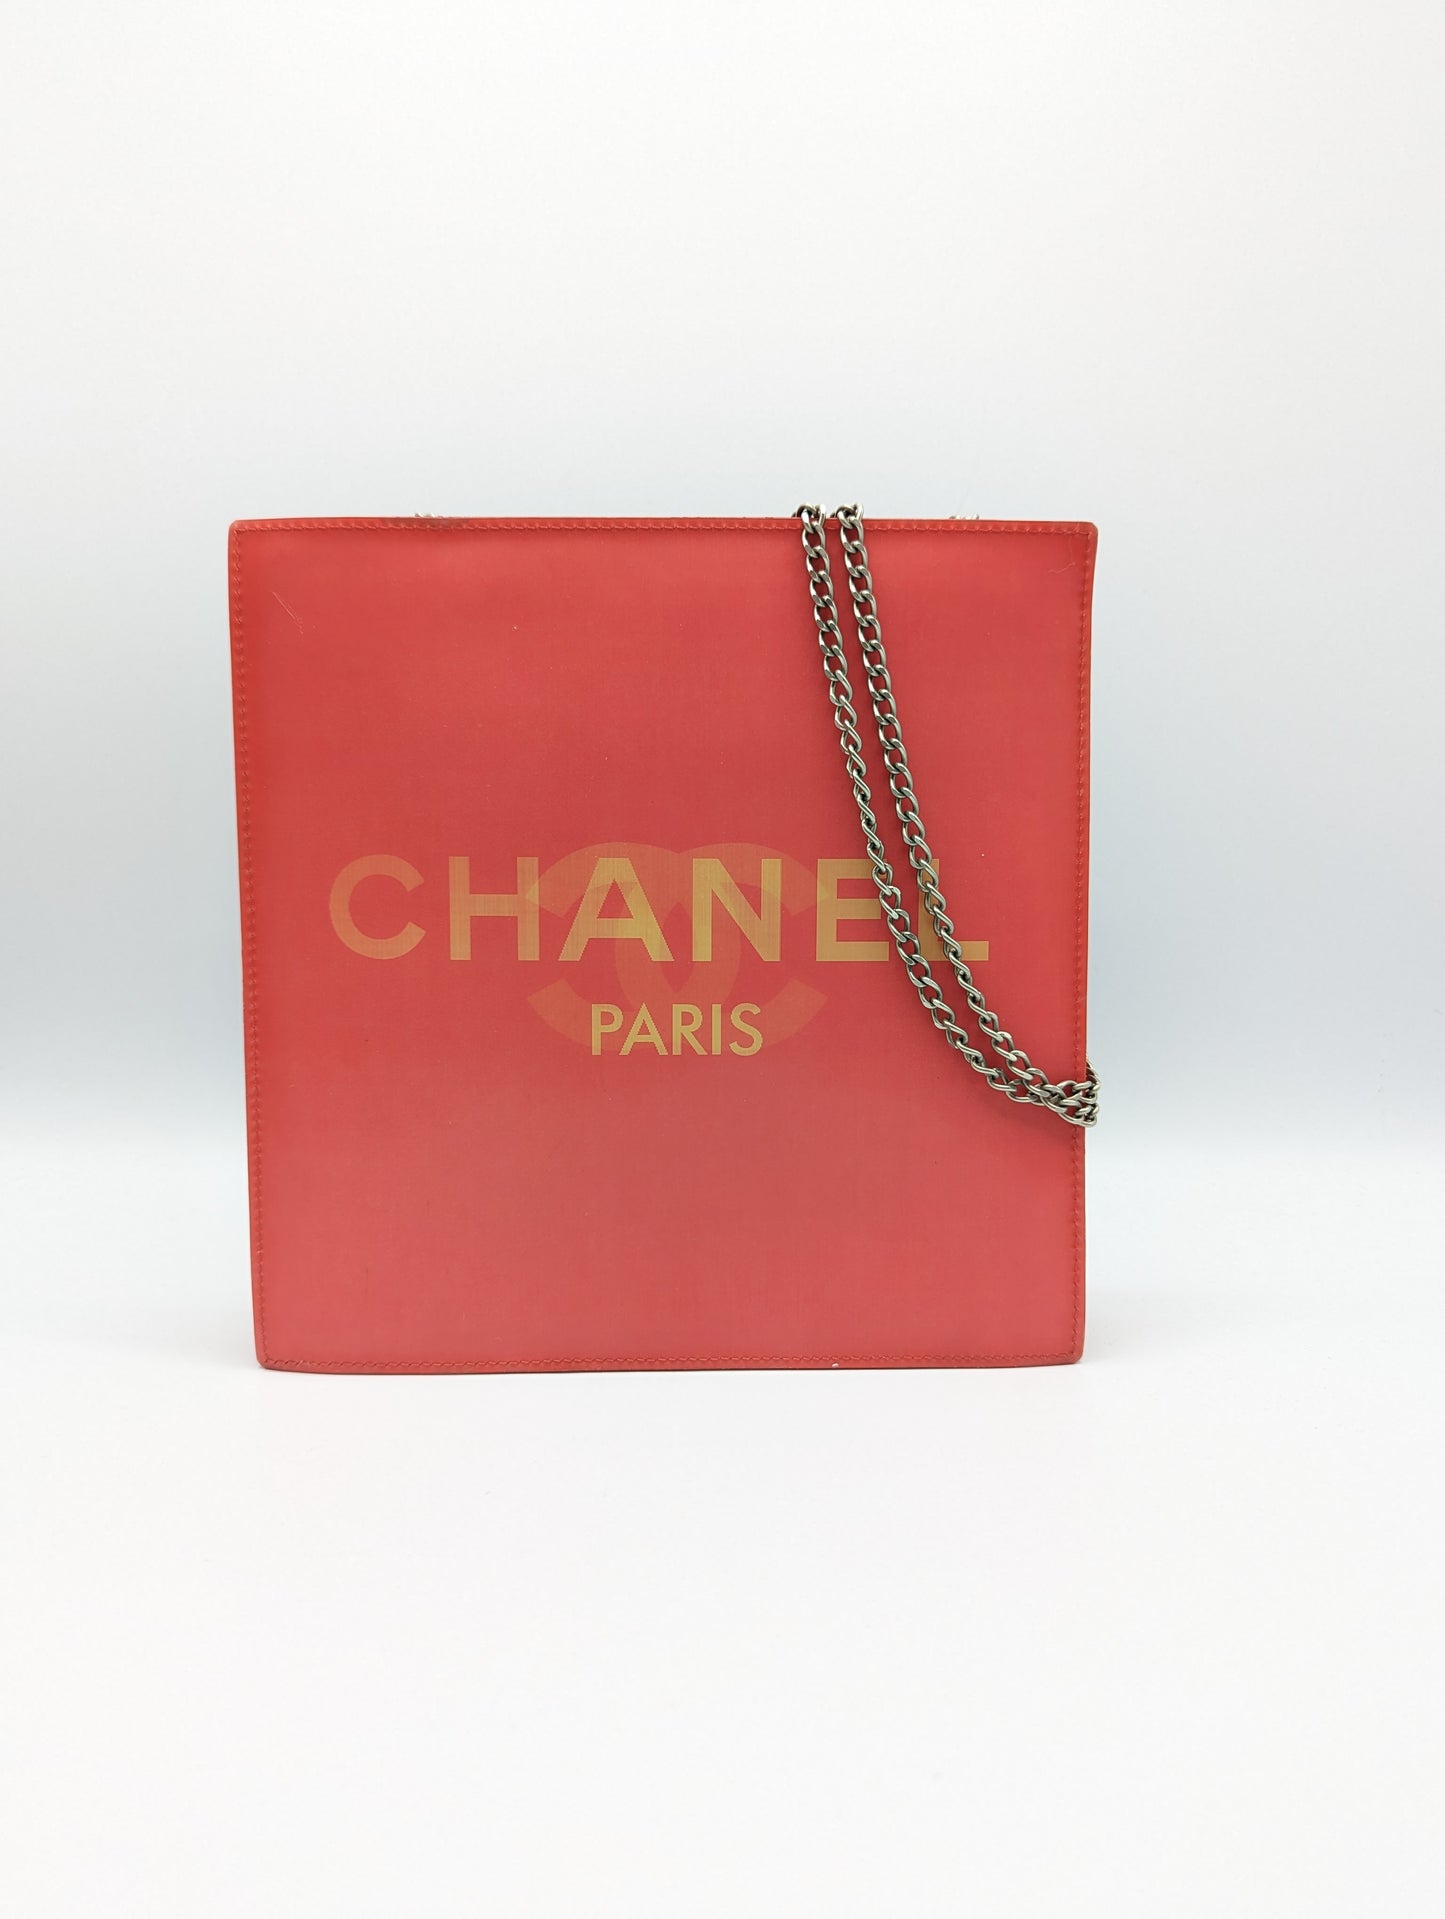 Authentic Chanel Hologram Red Shoulder Bag – For The Love of Luxury